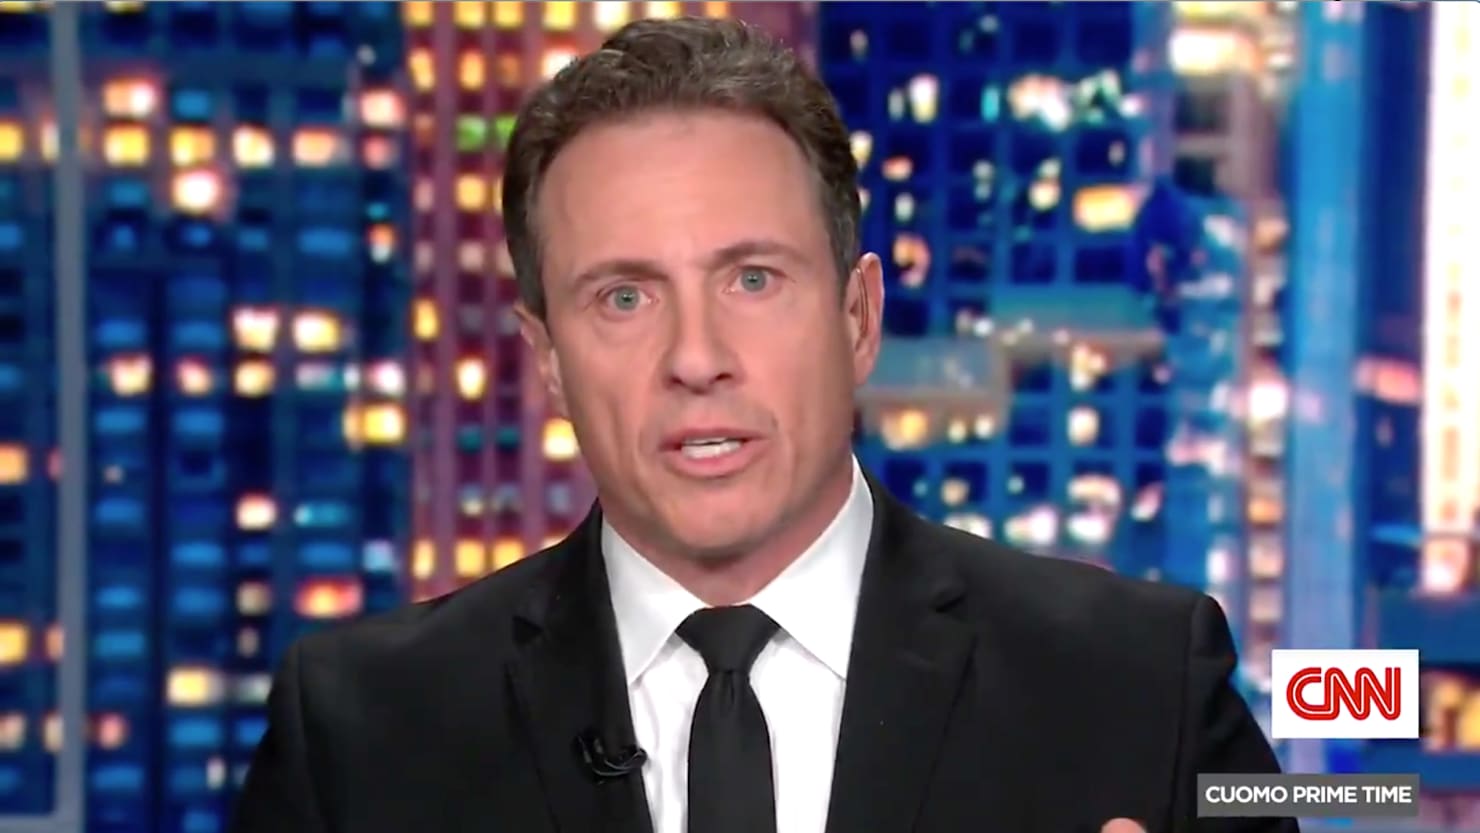 CNN’s Chris Cuomo strangely acknowledges the allegations against Brother Andrew Cuomo